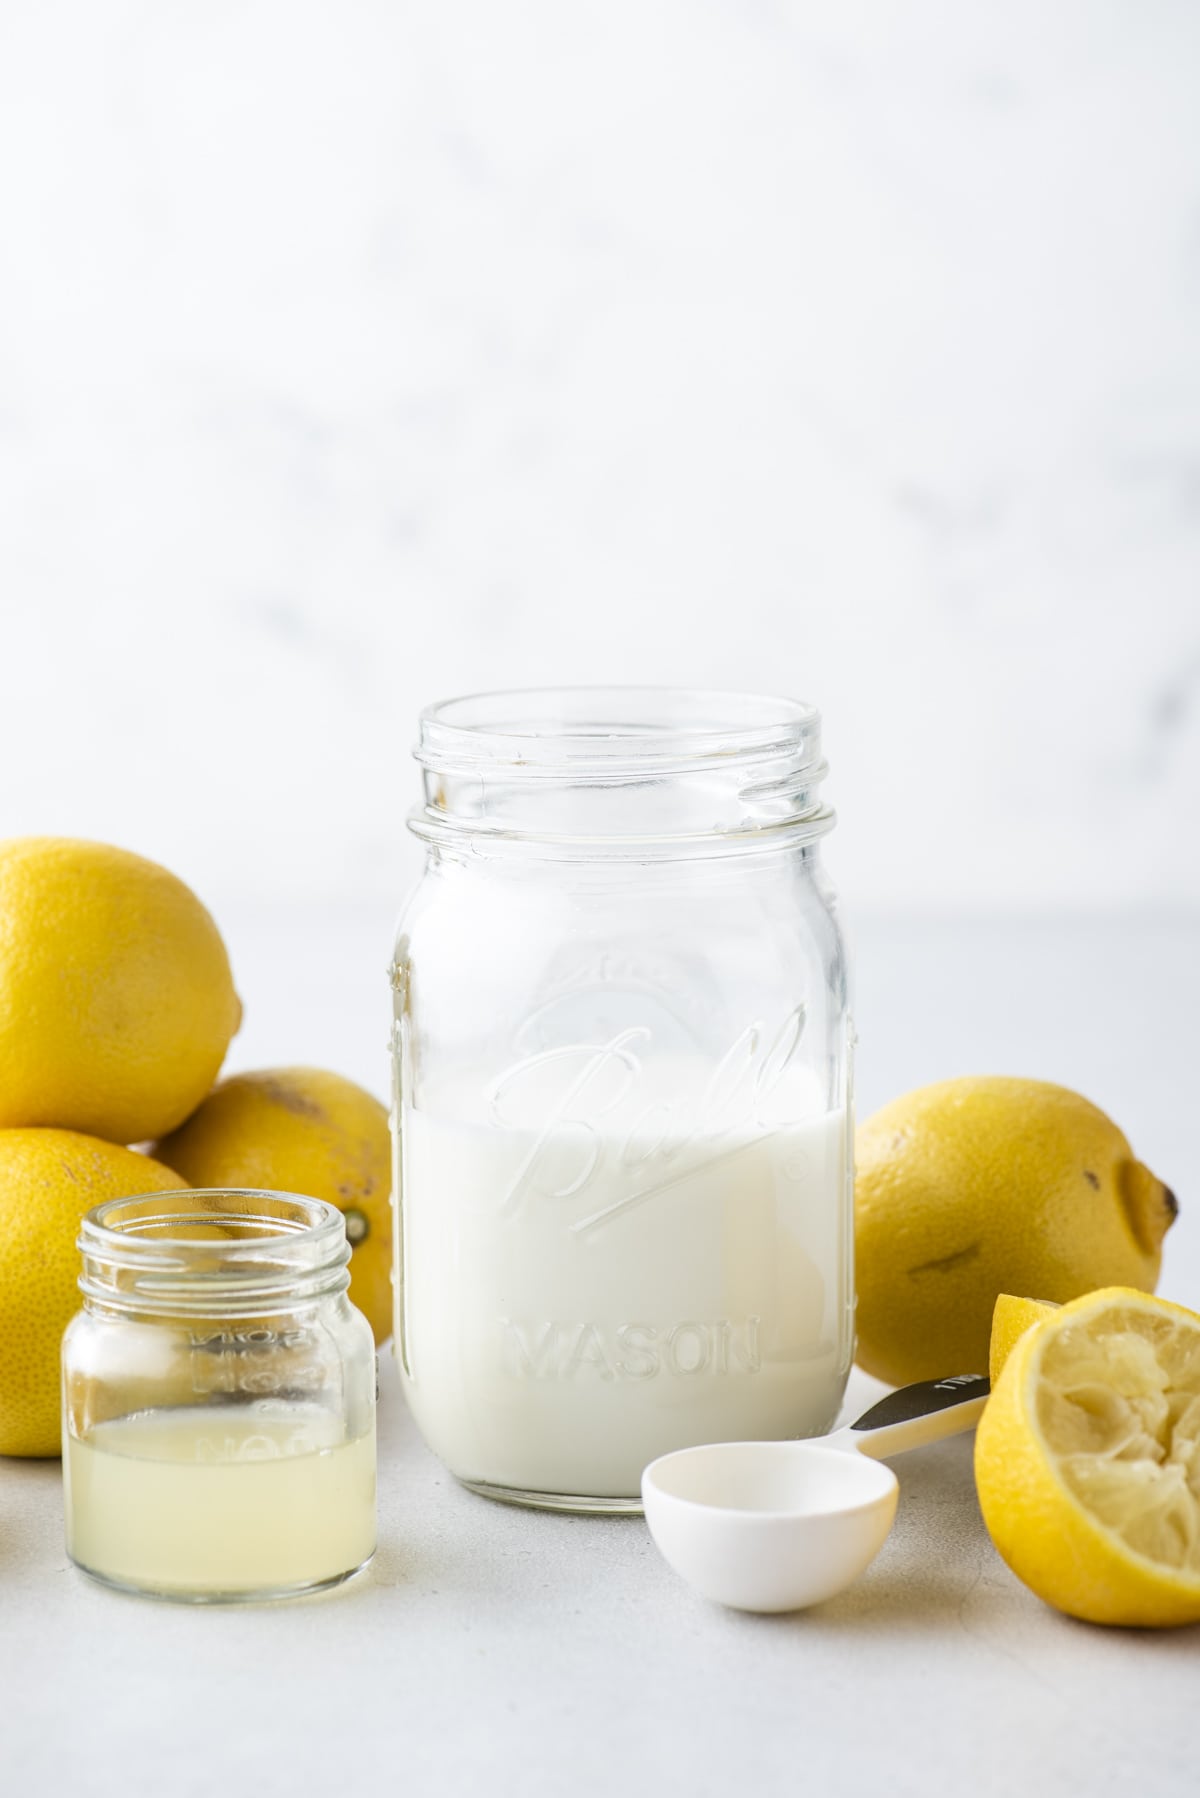 a mason jar full of buttermilk surrounded by fresh whole and sliced lemons, a white tablespoon measurer and a small clear glass jar of lemon juice